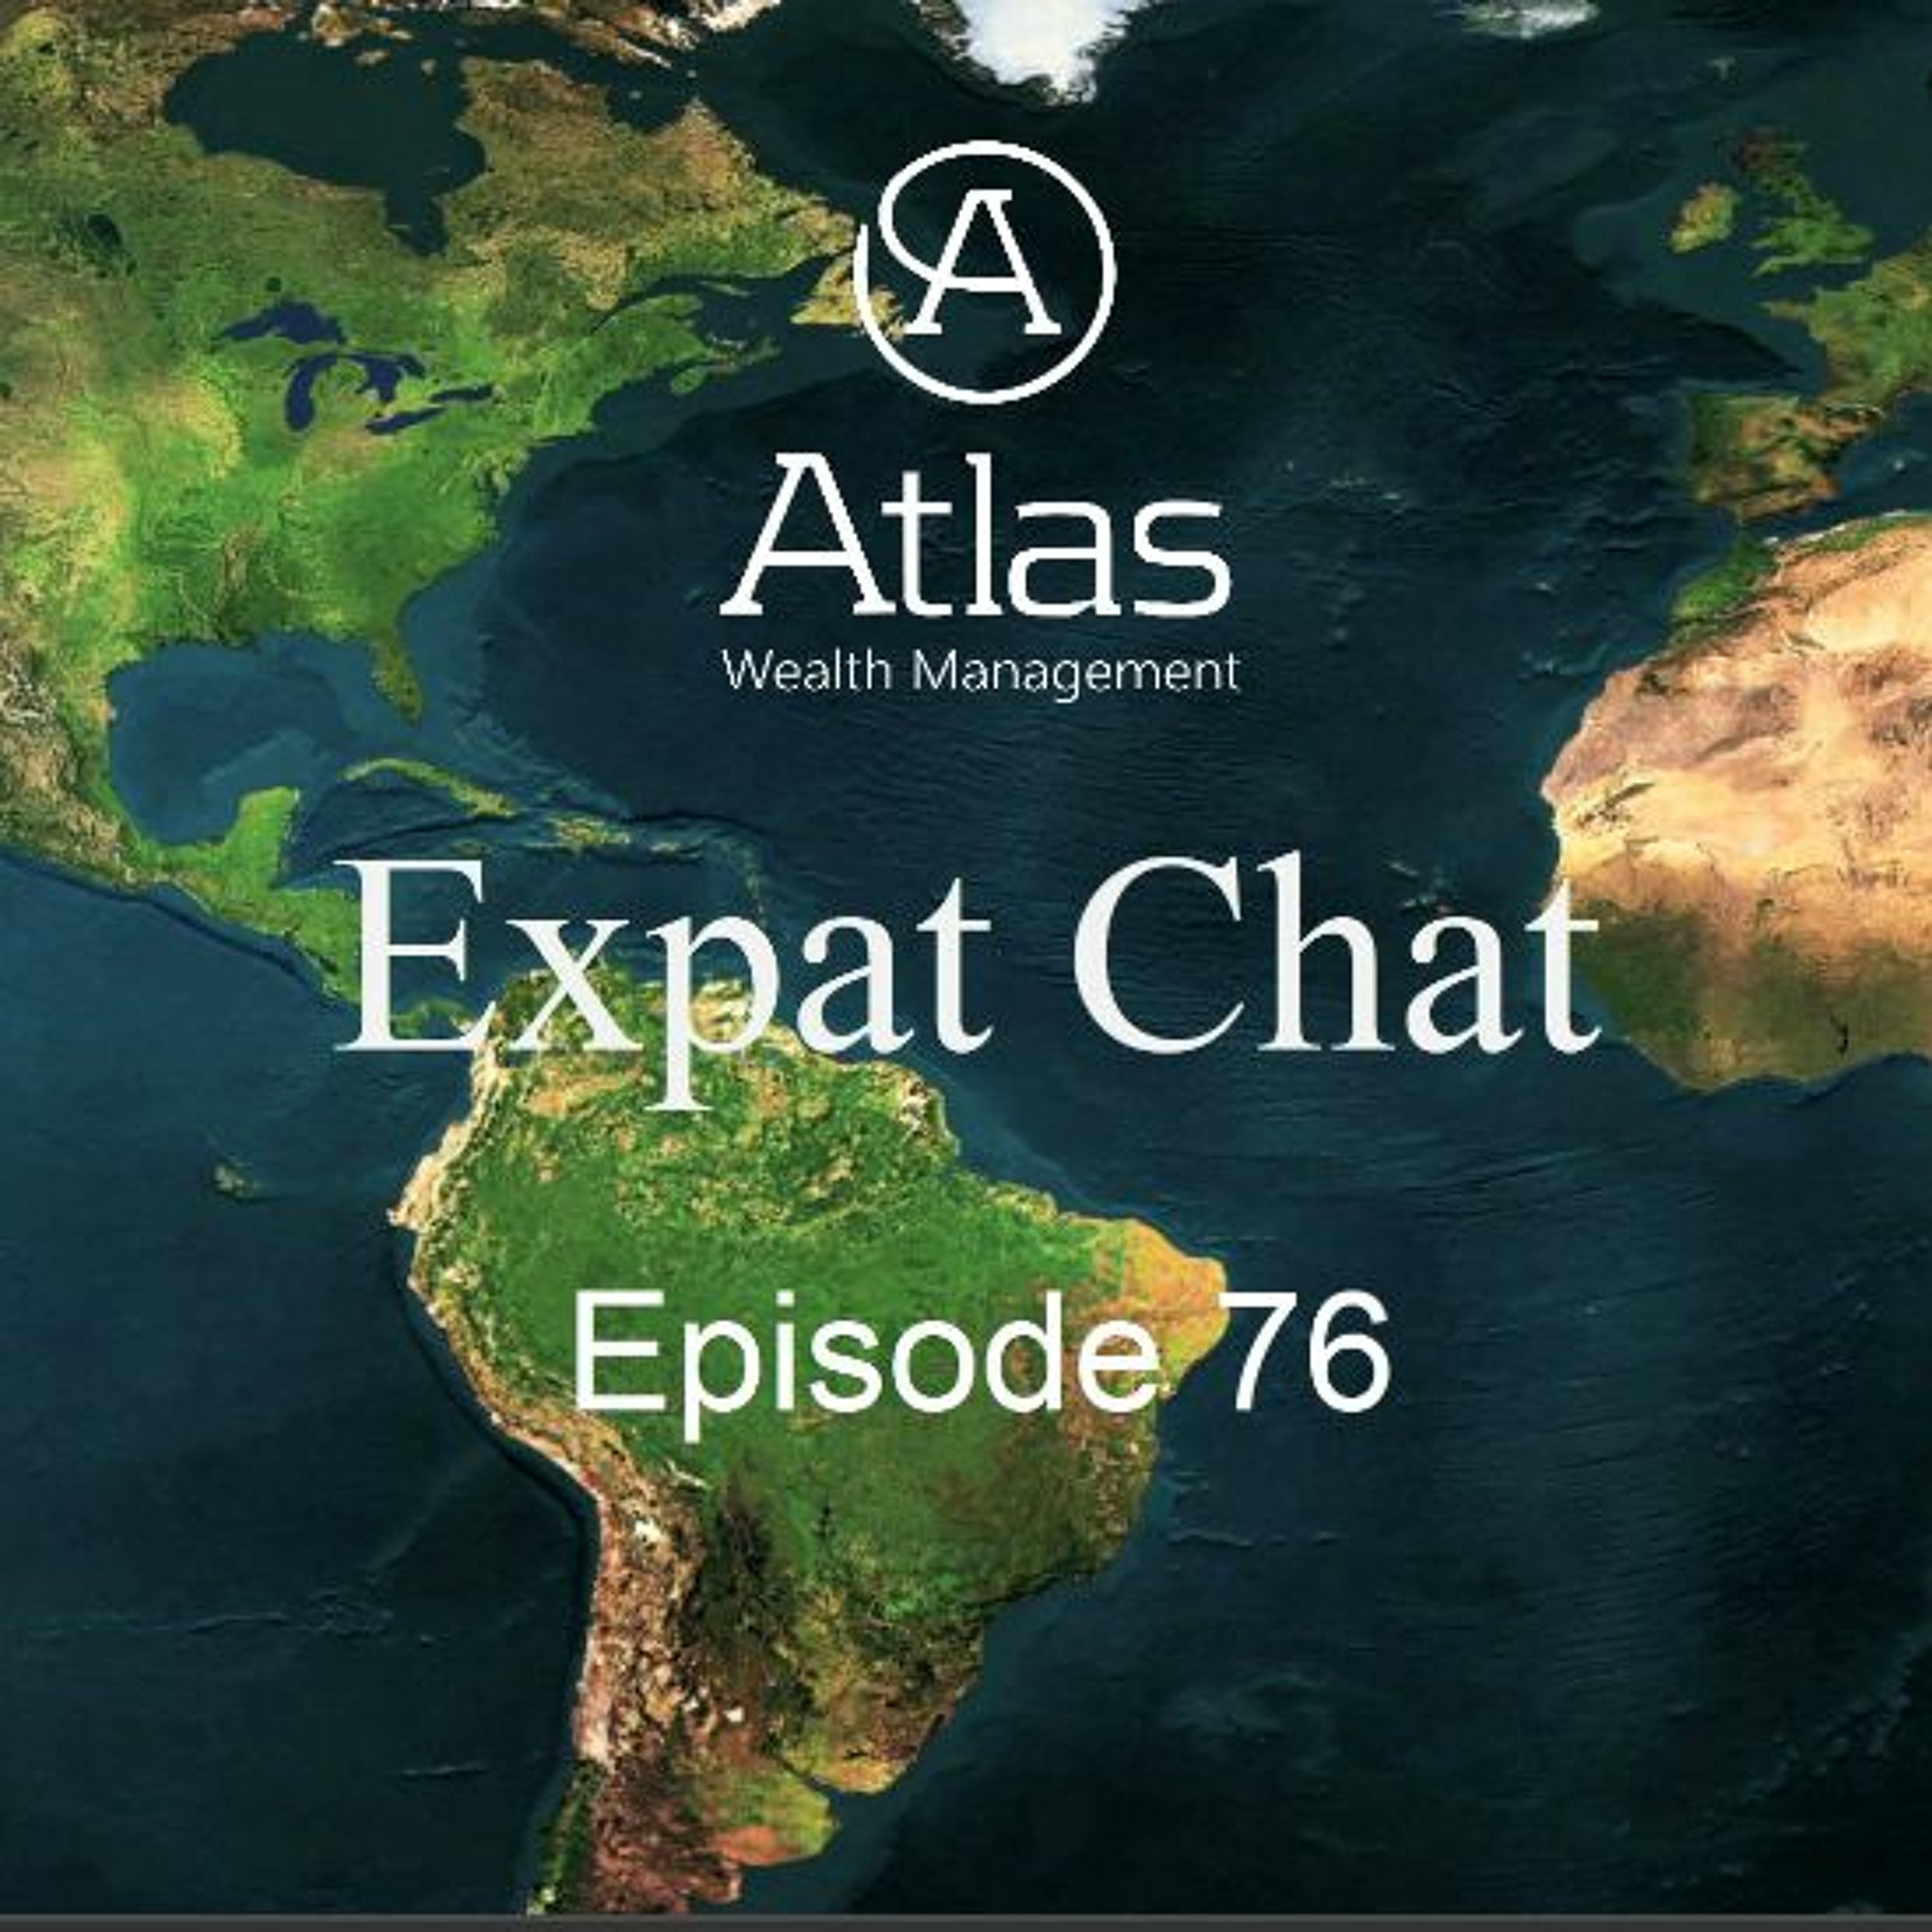 Expat Chat Episode 76 - Superannuation Transfers And Limits For Expats